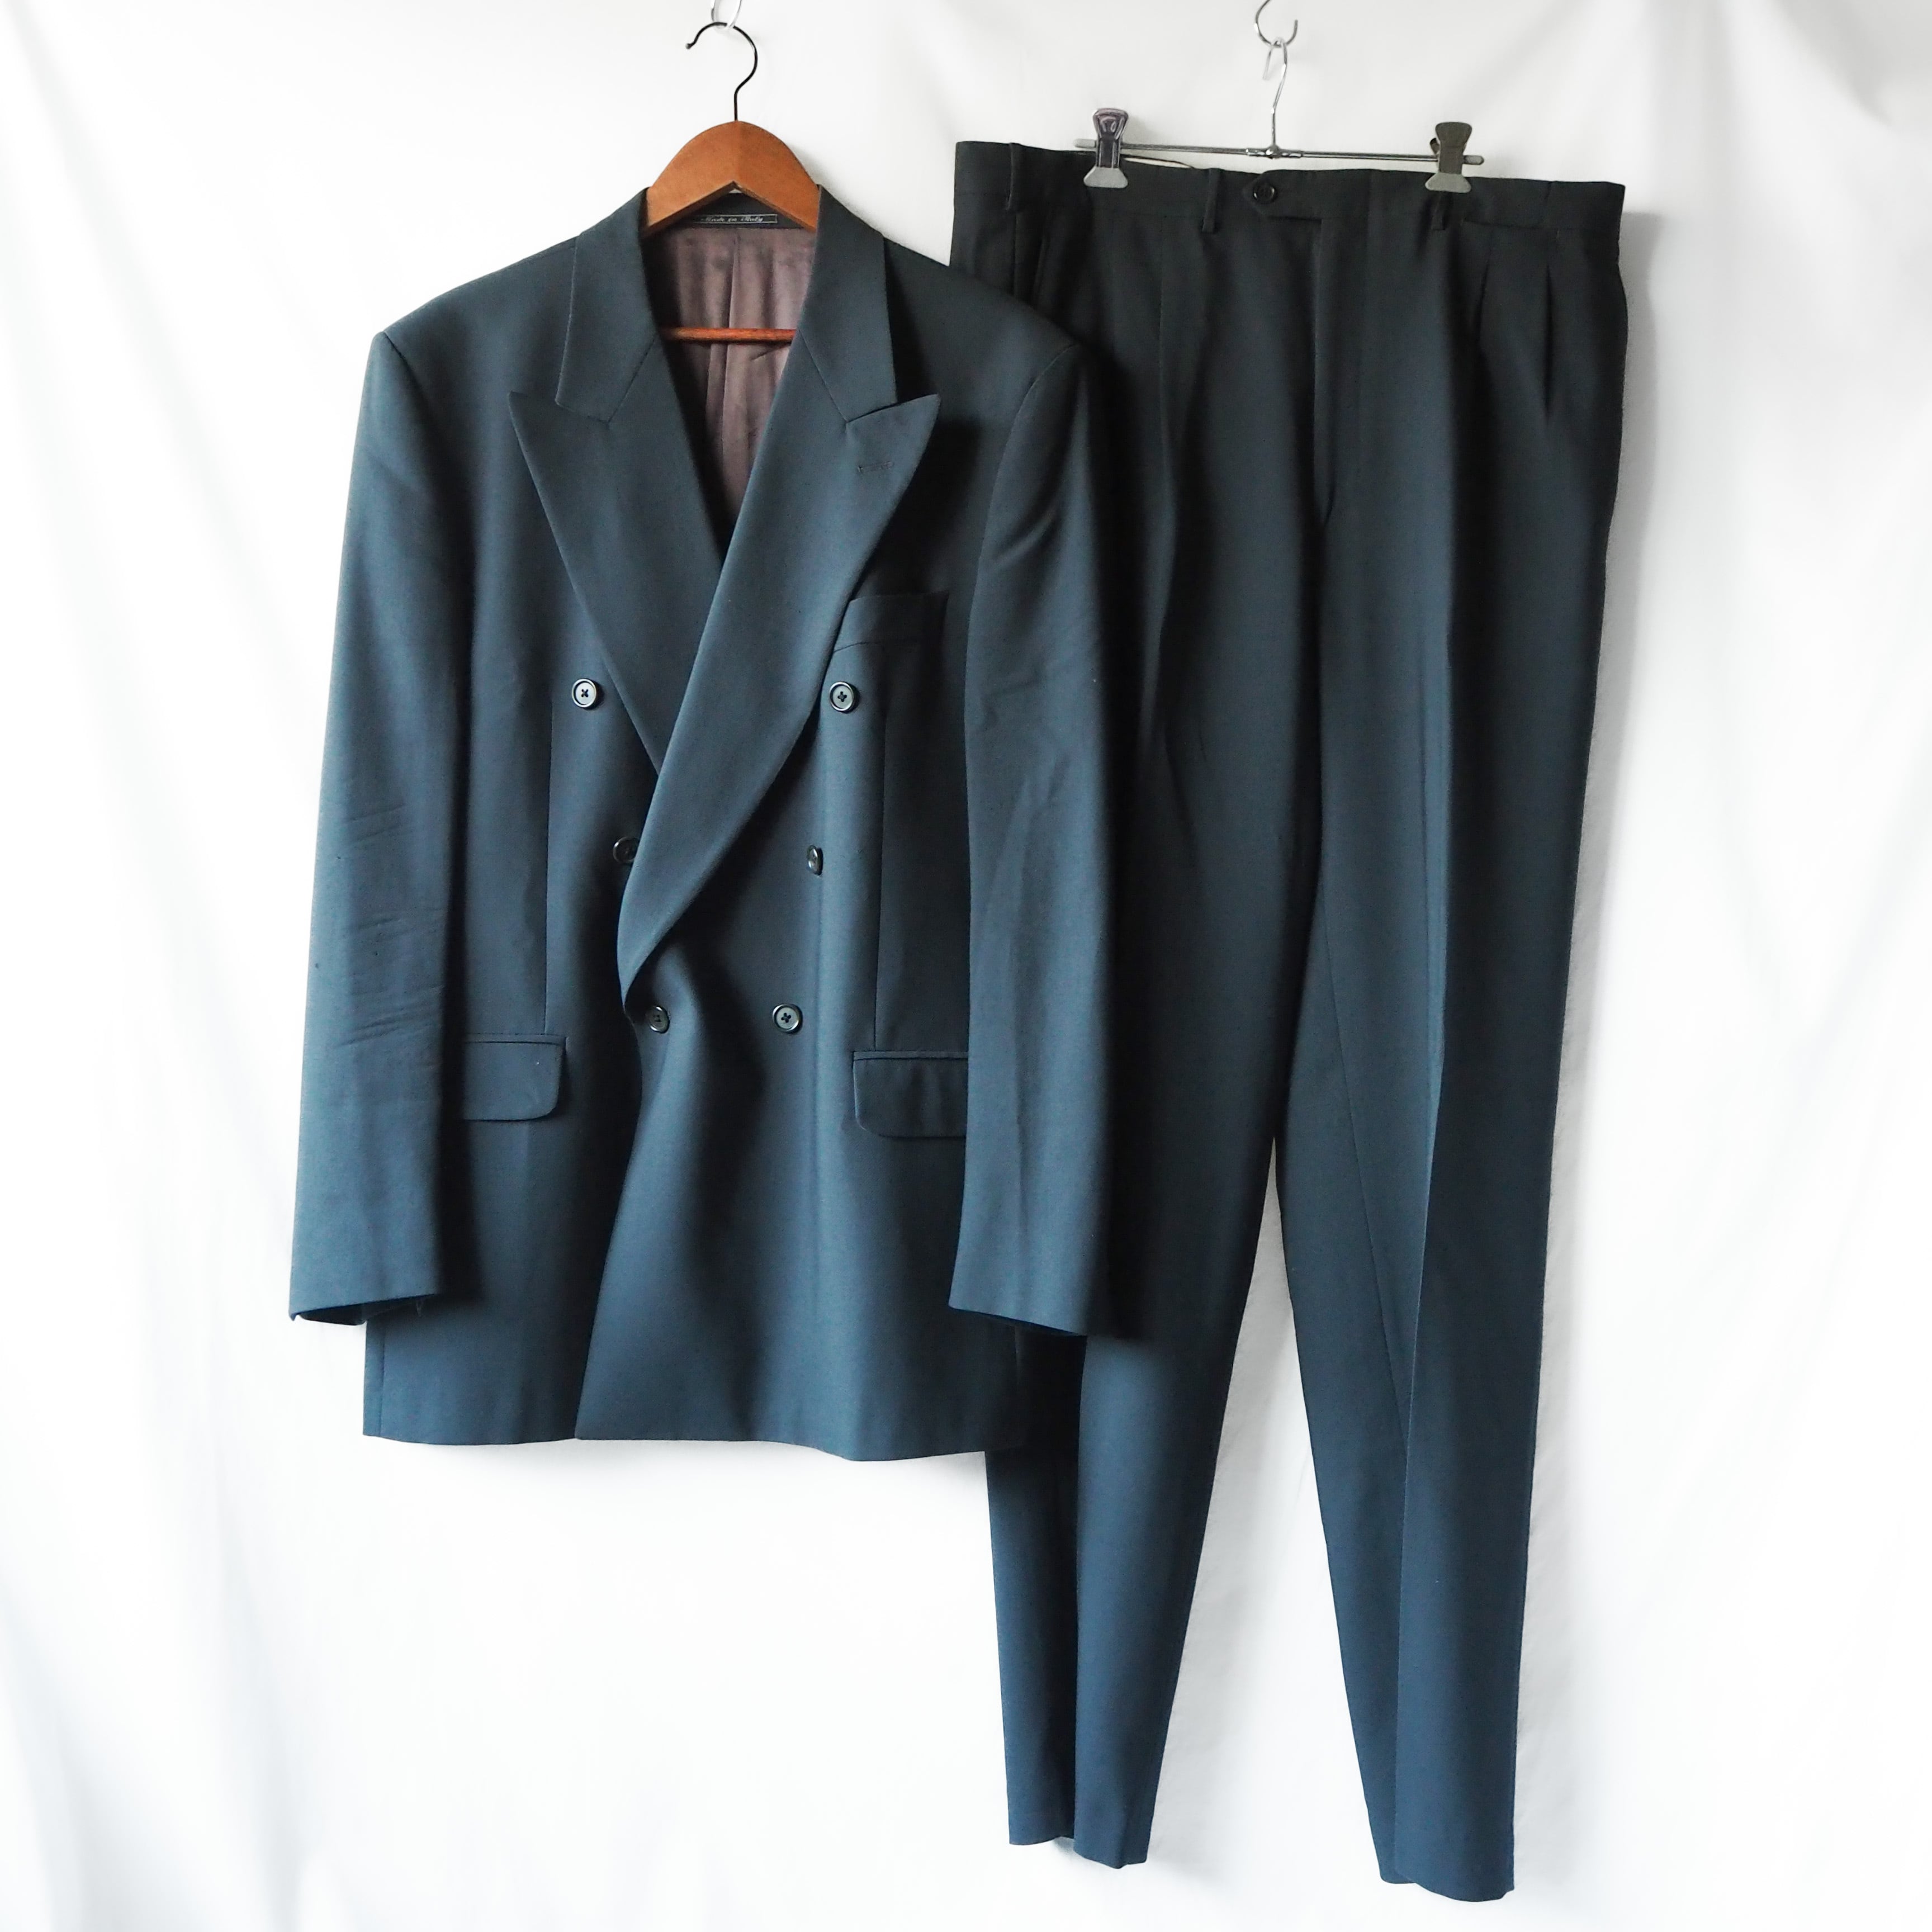 About 80s “FENDI” set up double suit 80年代 フェンディ